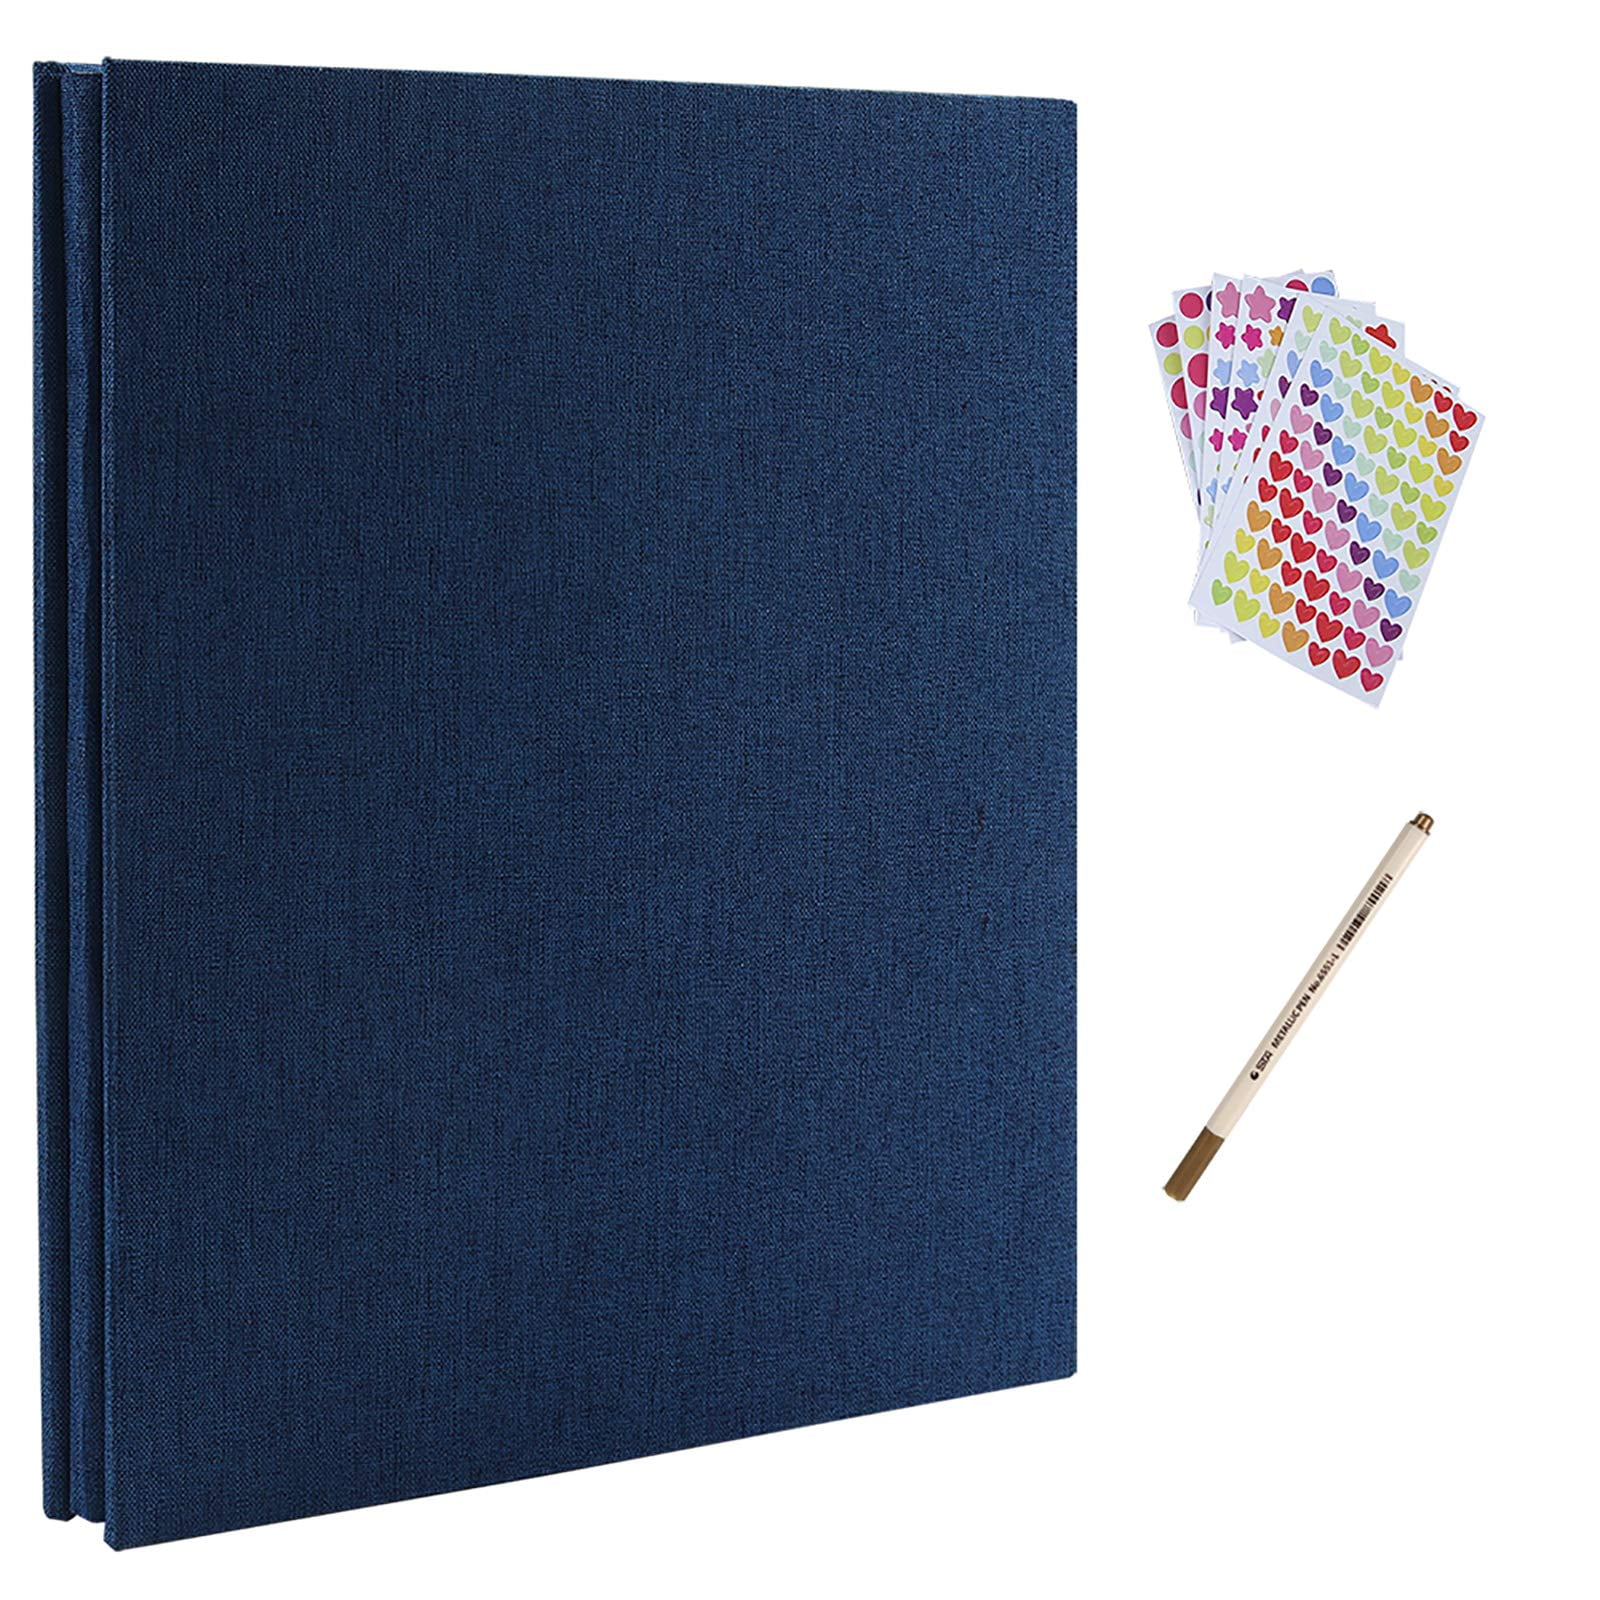 Memory Binder Photo Album with black self-adhesive pages (blue) - AHZOA